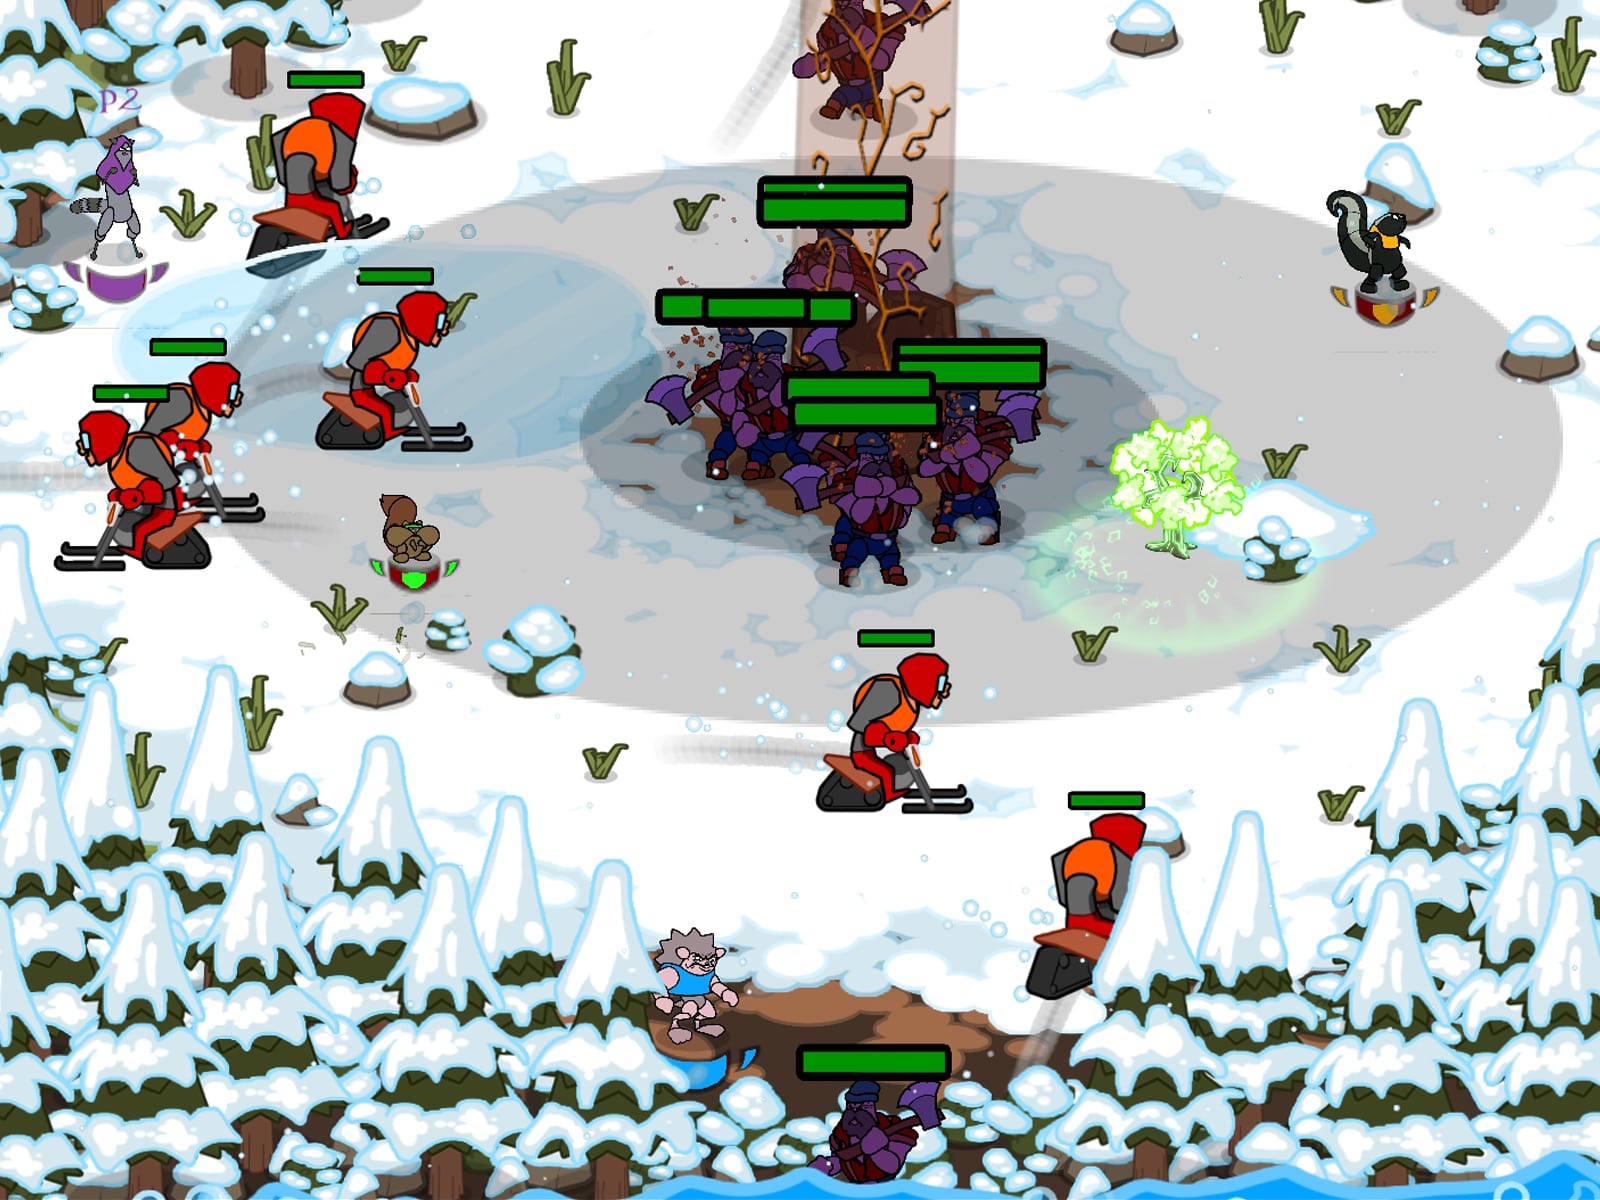 Screenshot featuring gameplay in a snowy forest from DigiPen student game N.U.T.S.: Forest FriendZ